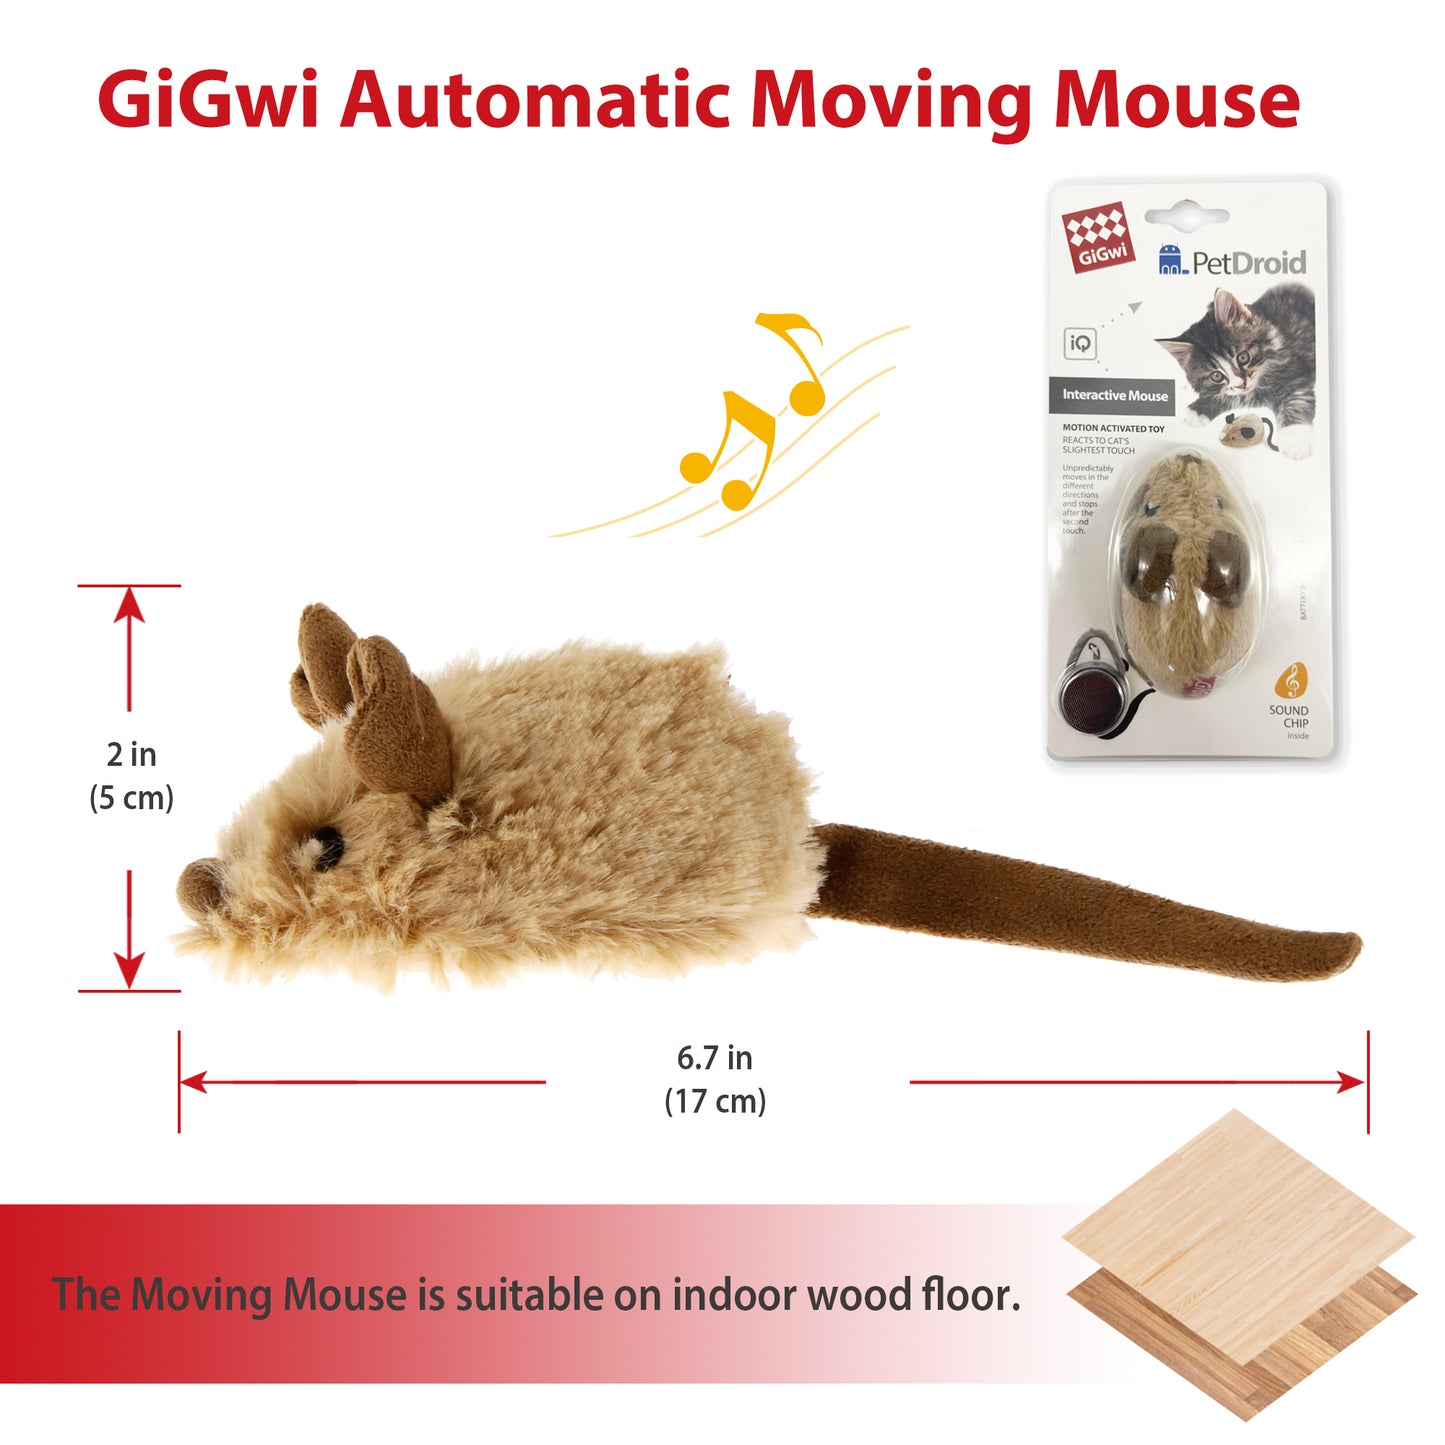 GiGwi Smart Moving Squeaky Mouse (oreille brune)